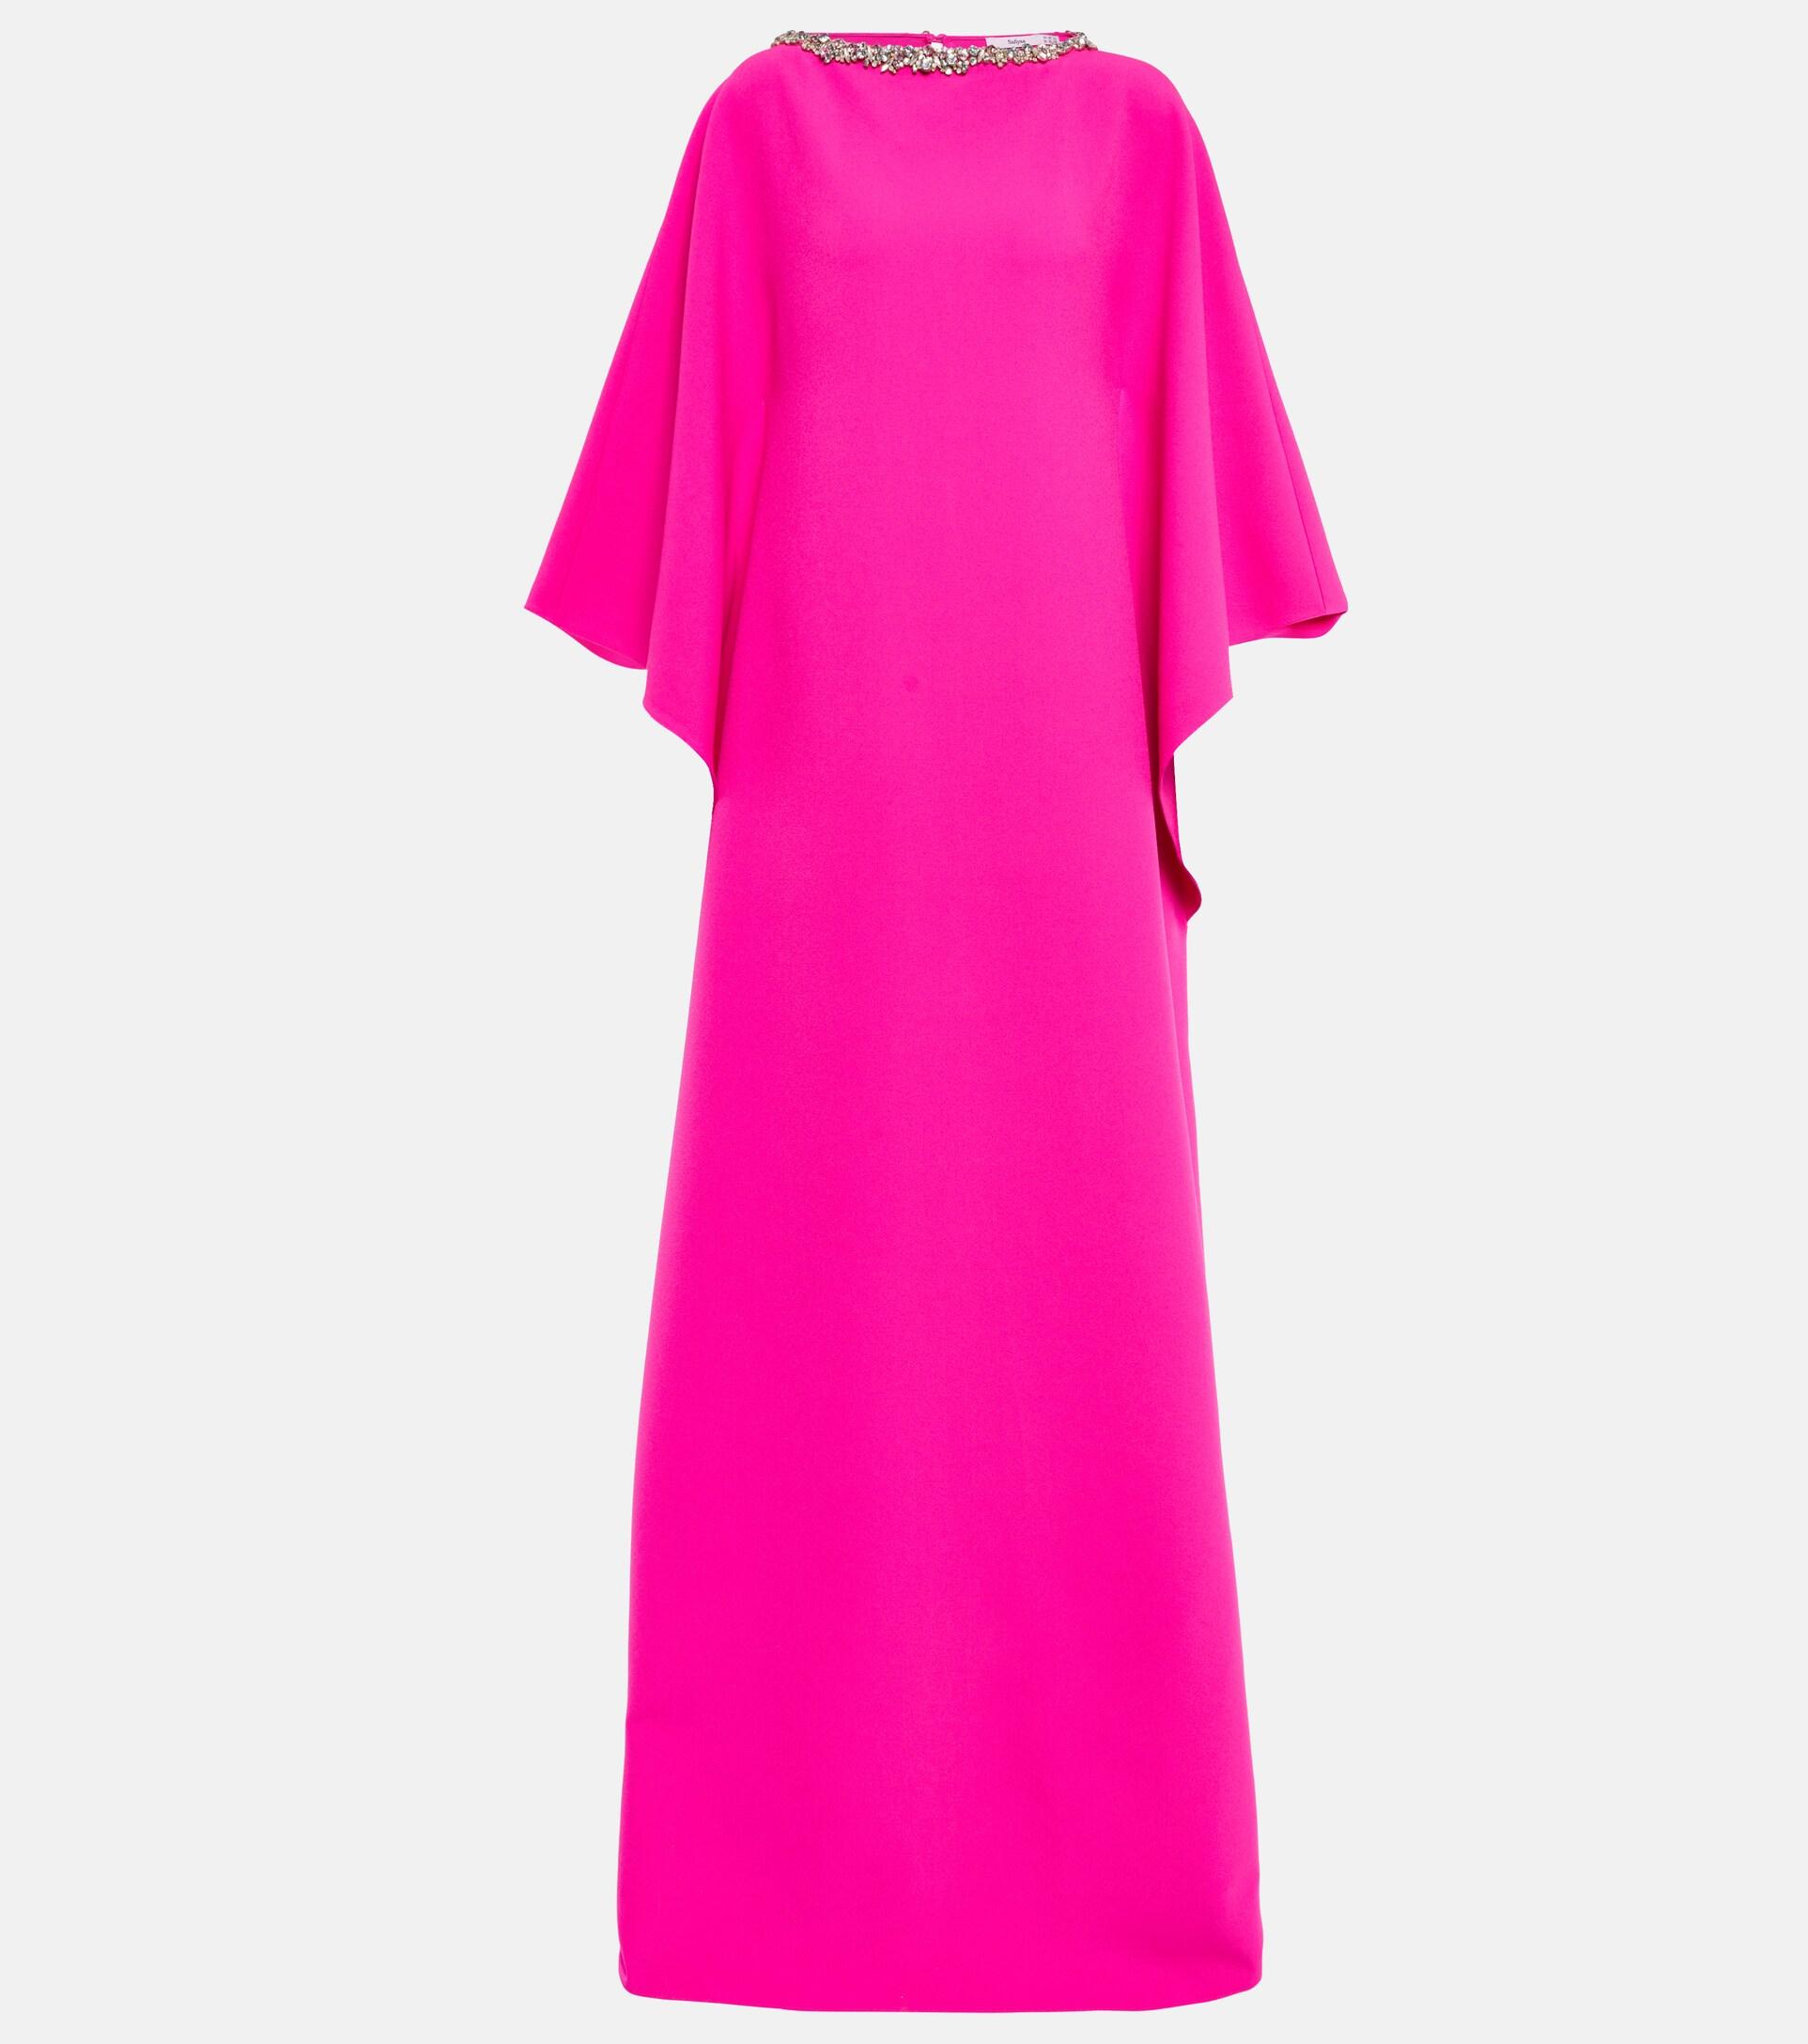 Safiyaa Arama Embellished Crepe Gown in Pink | Lyst